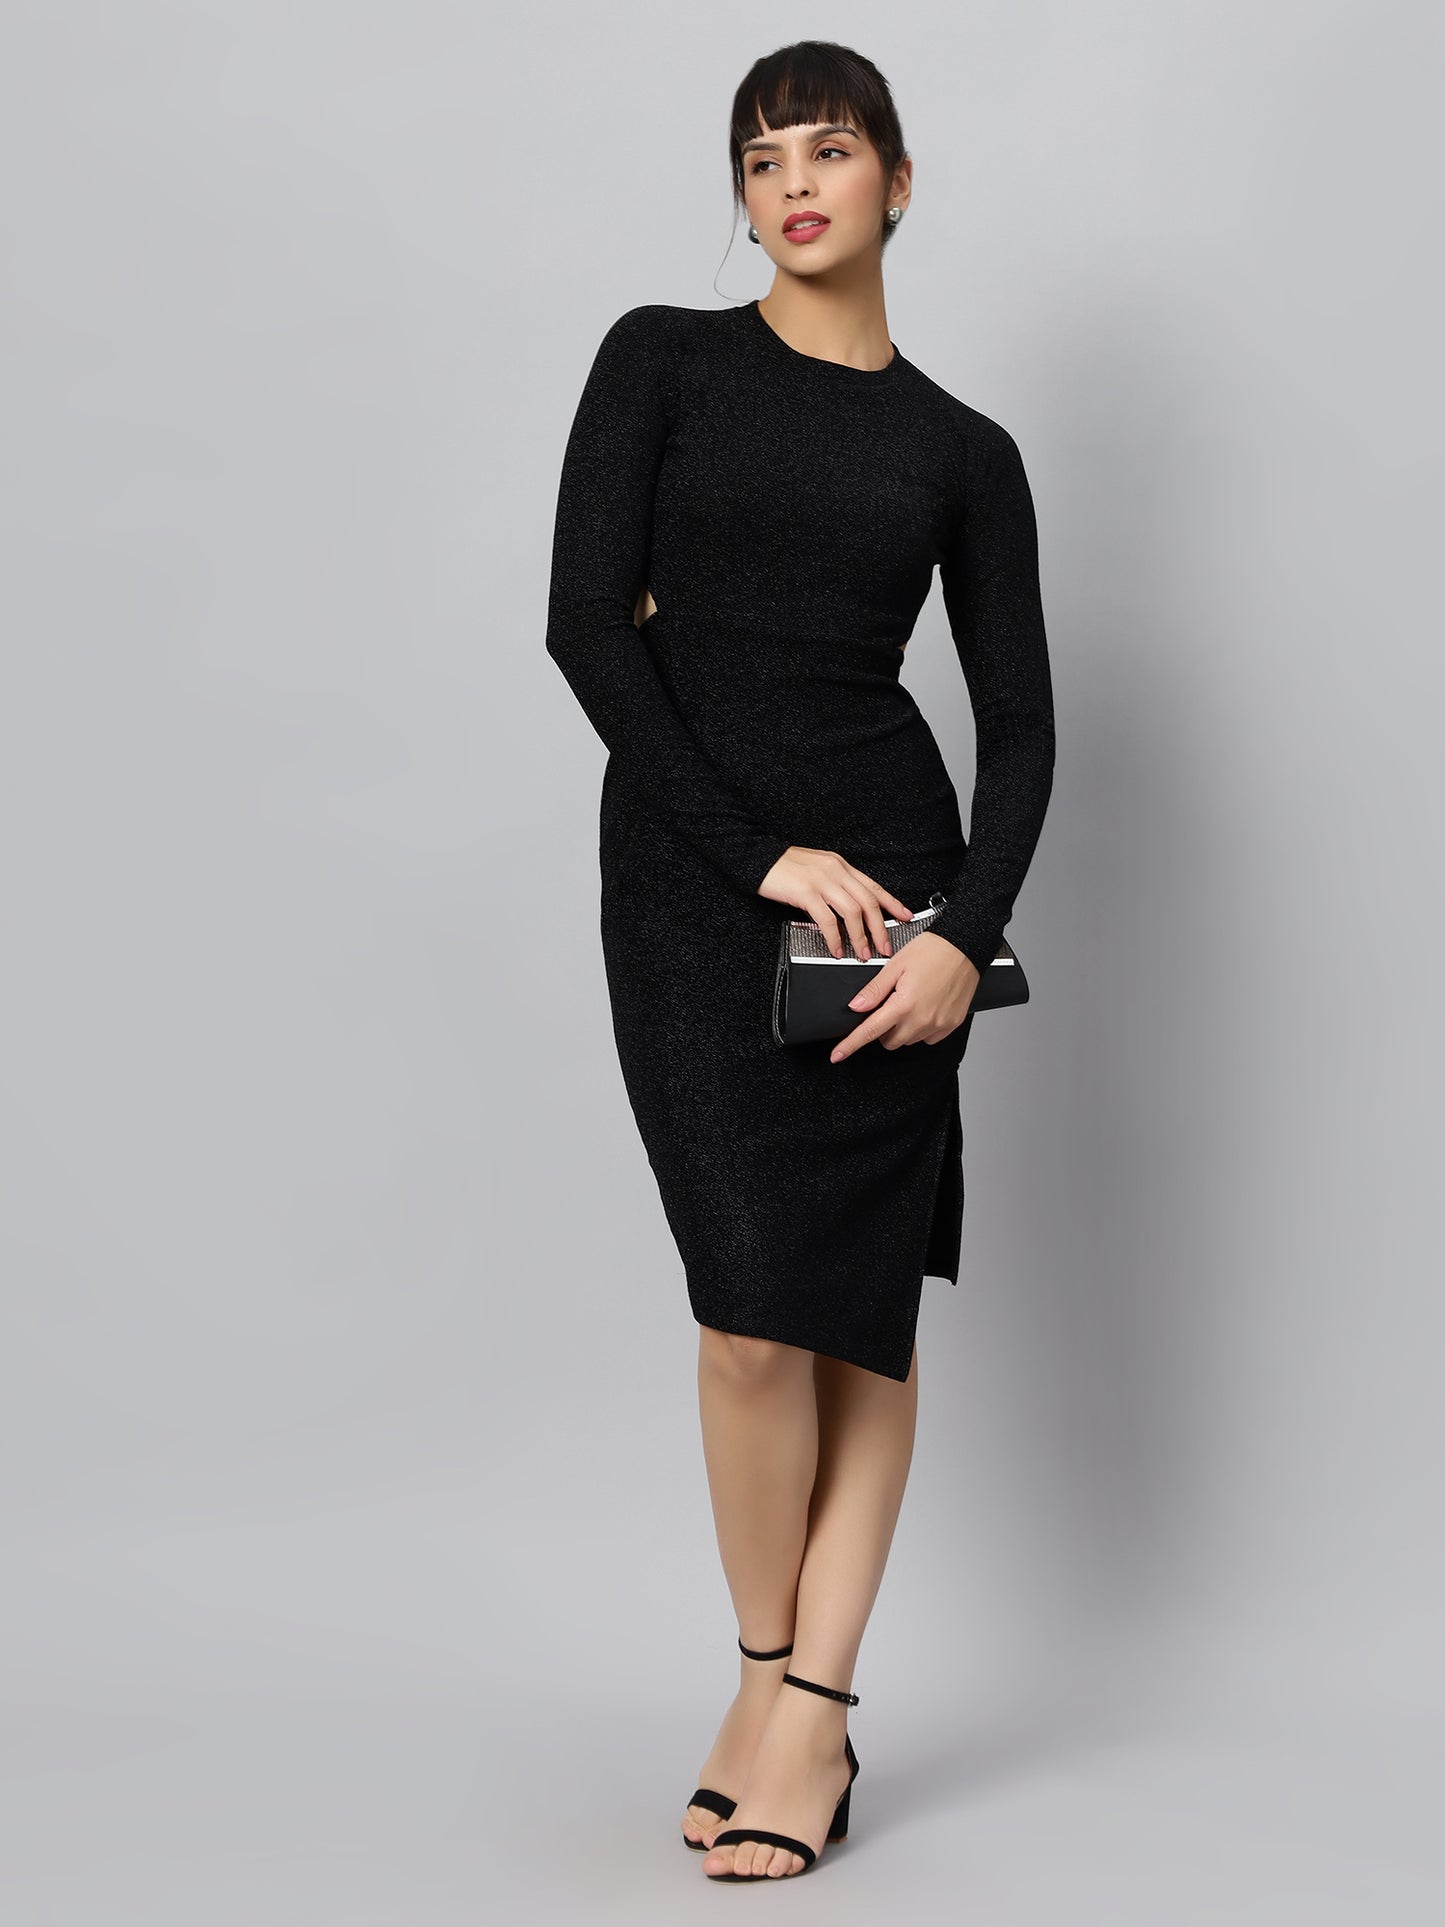 Black Raglan Sleeves Bling & Sparkly Cut-Out Party Dress